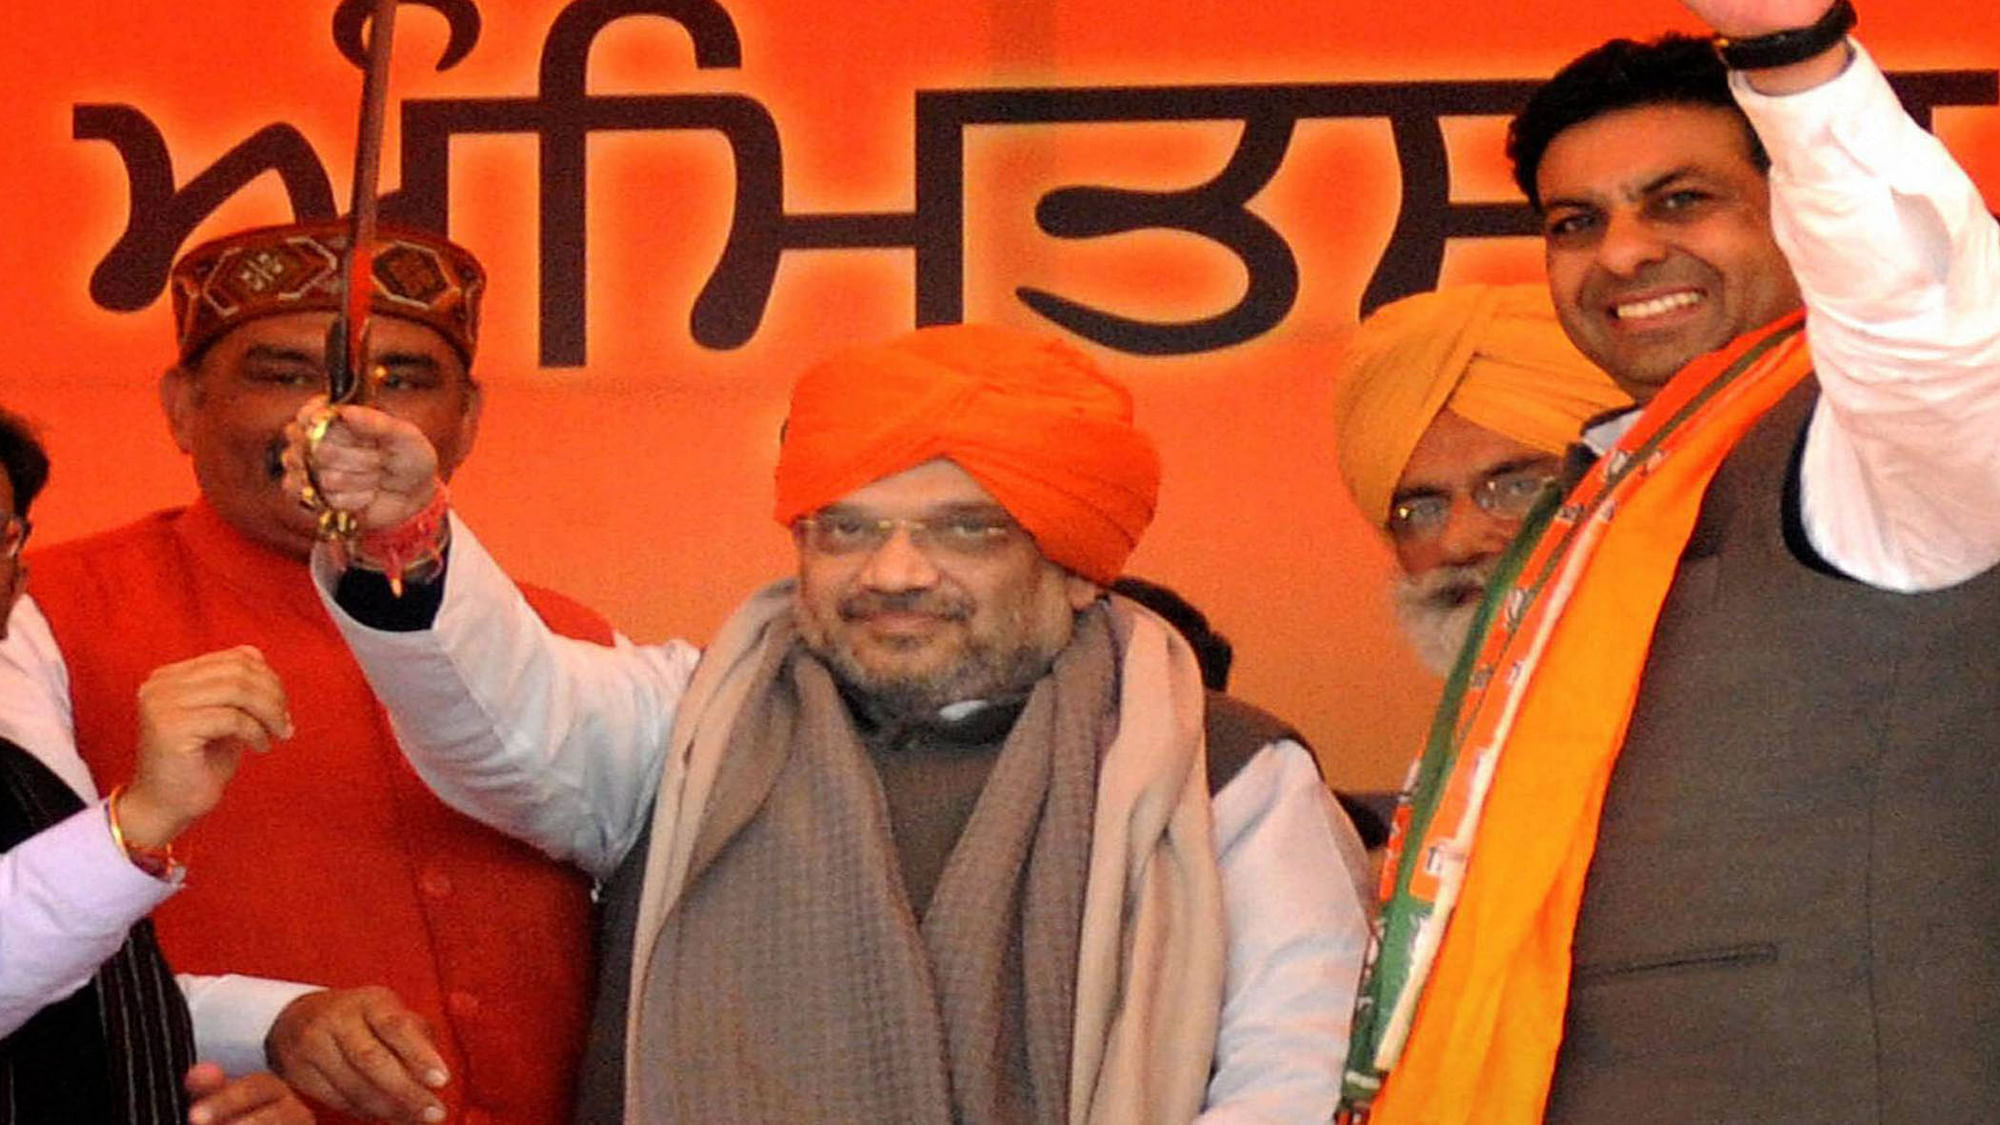 Amit Shah holds out a ceremonial sword at a rally in Amritsar on Monday. (Photo: PTI)